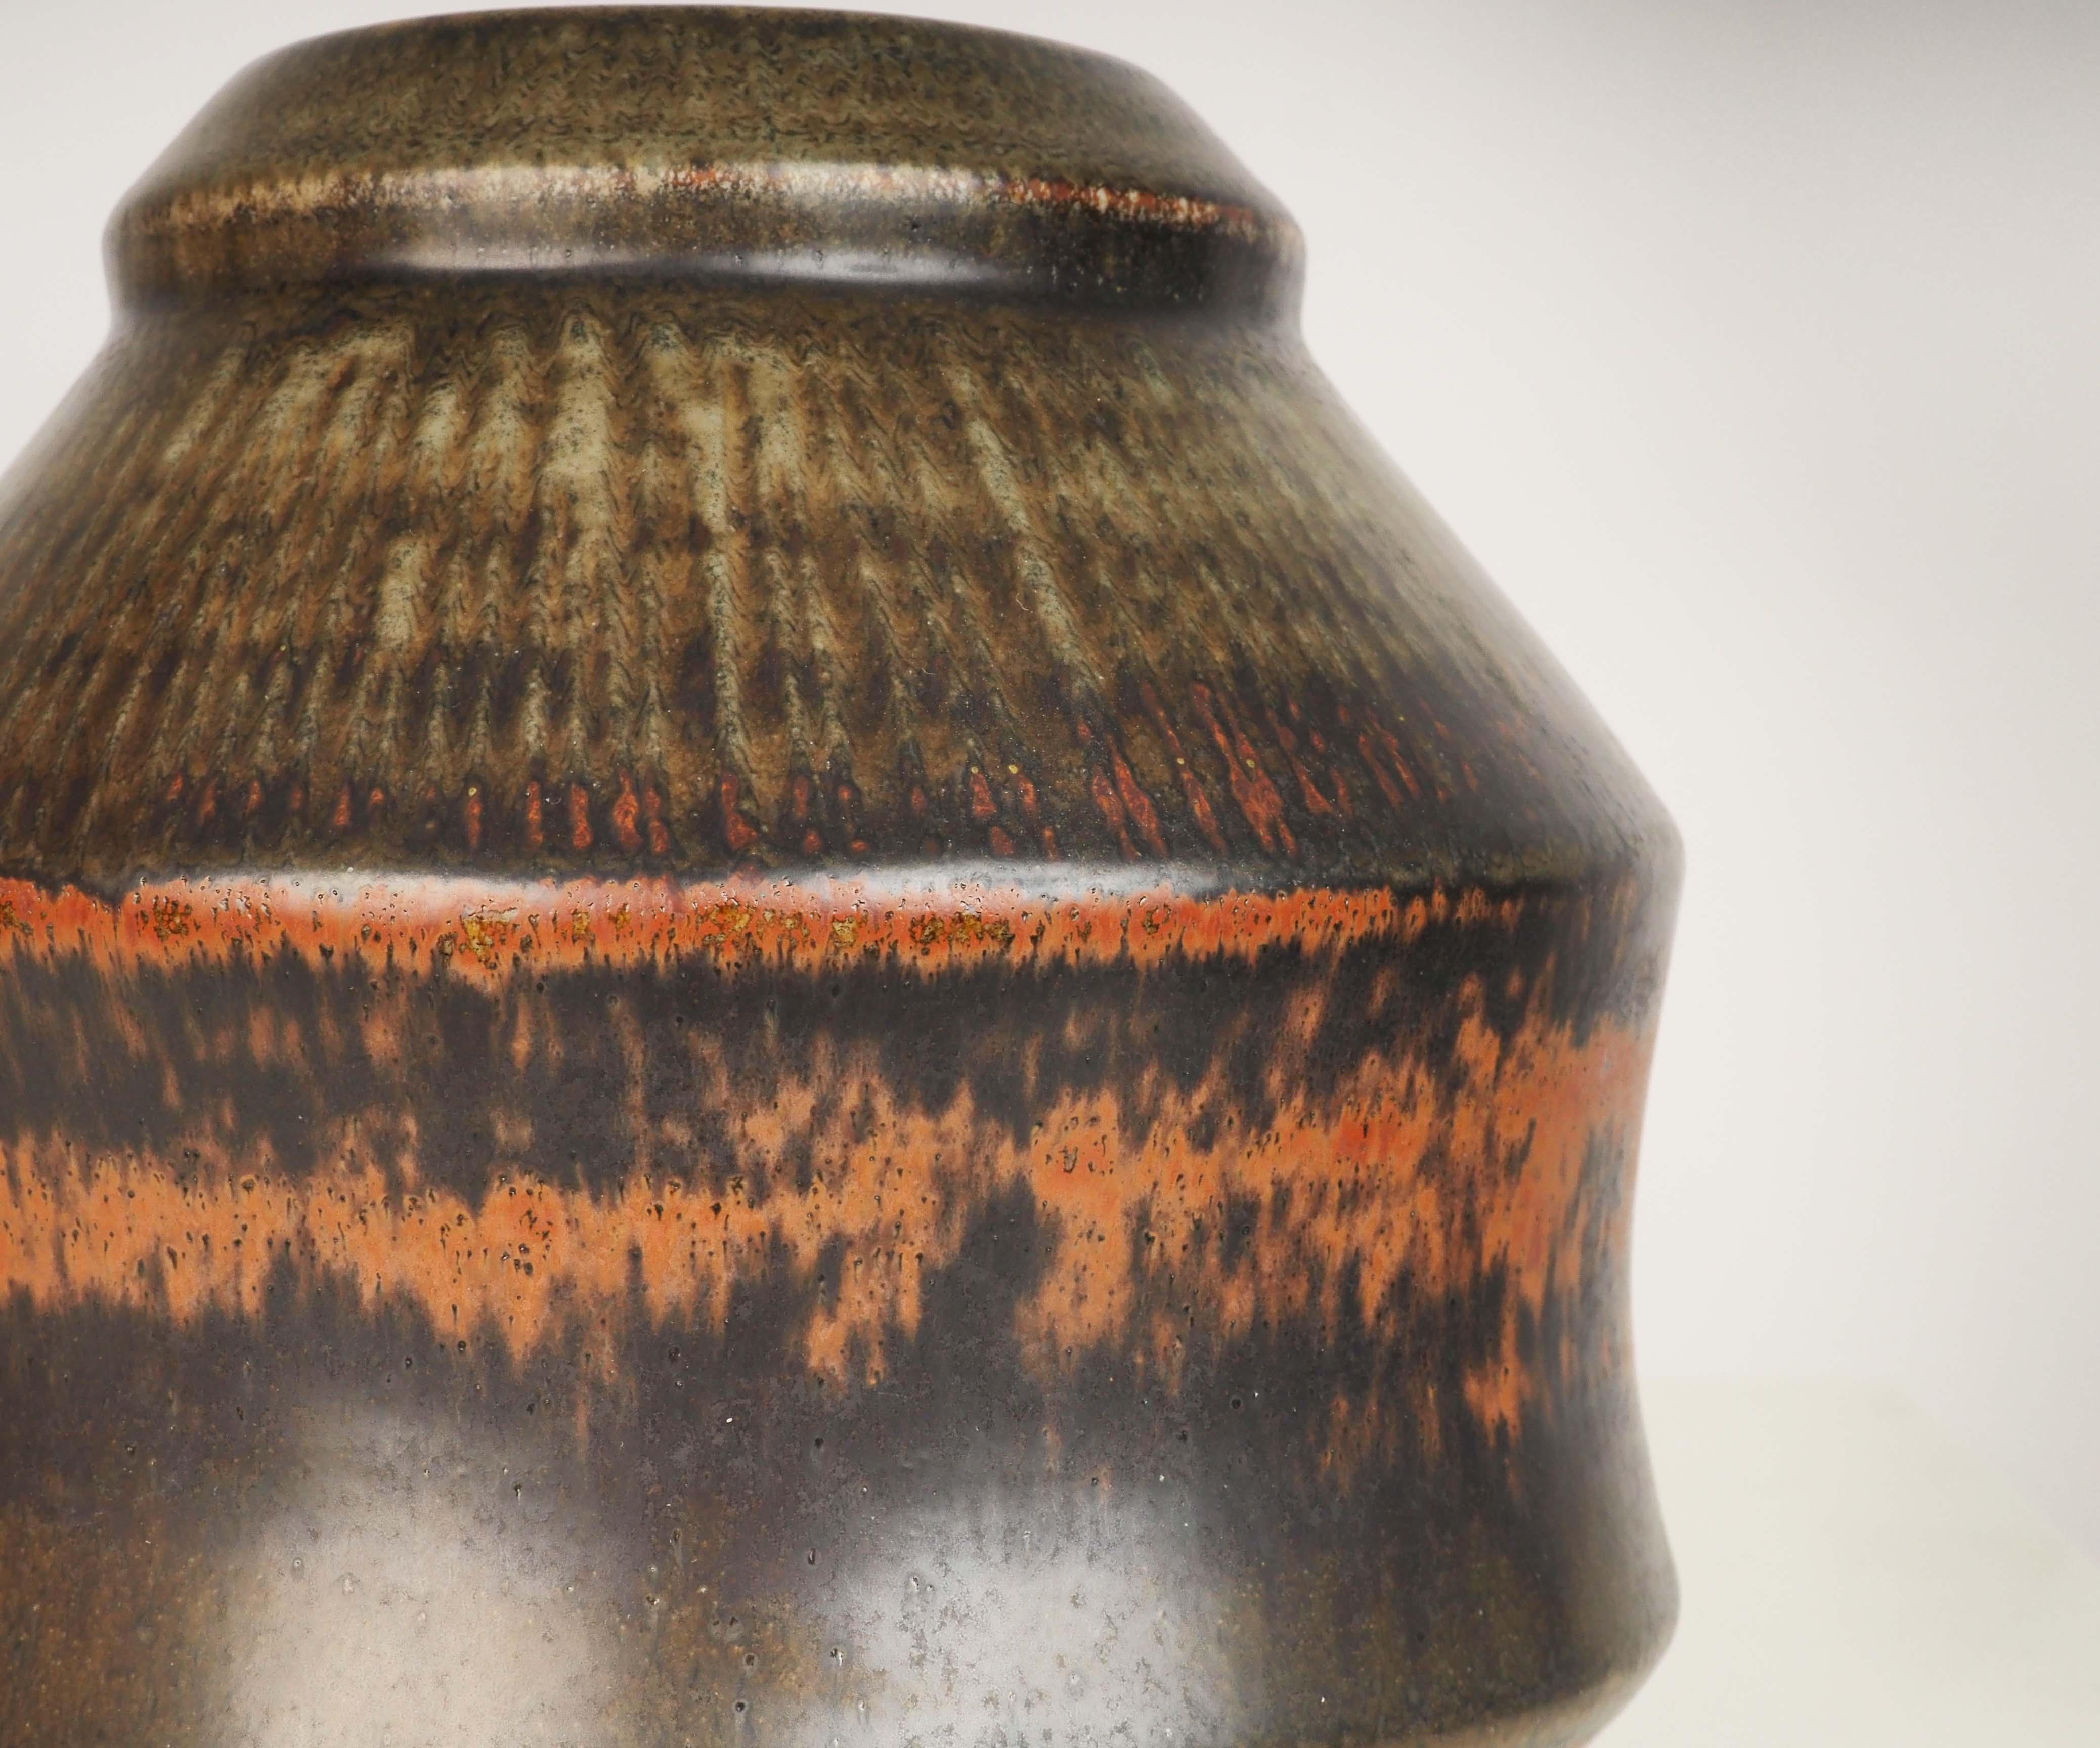 Vase in stoneware designed by Carl-Harry Stålhane for Rörstrand, Sweden. This vase was made in a limited edition.